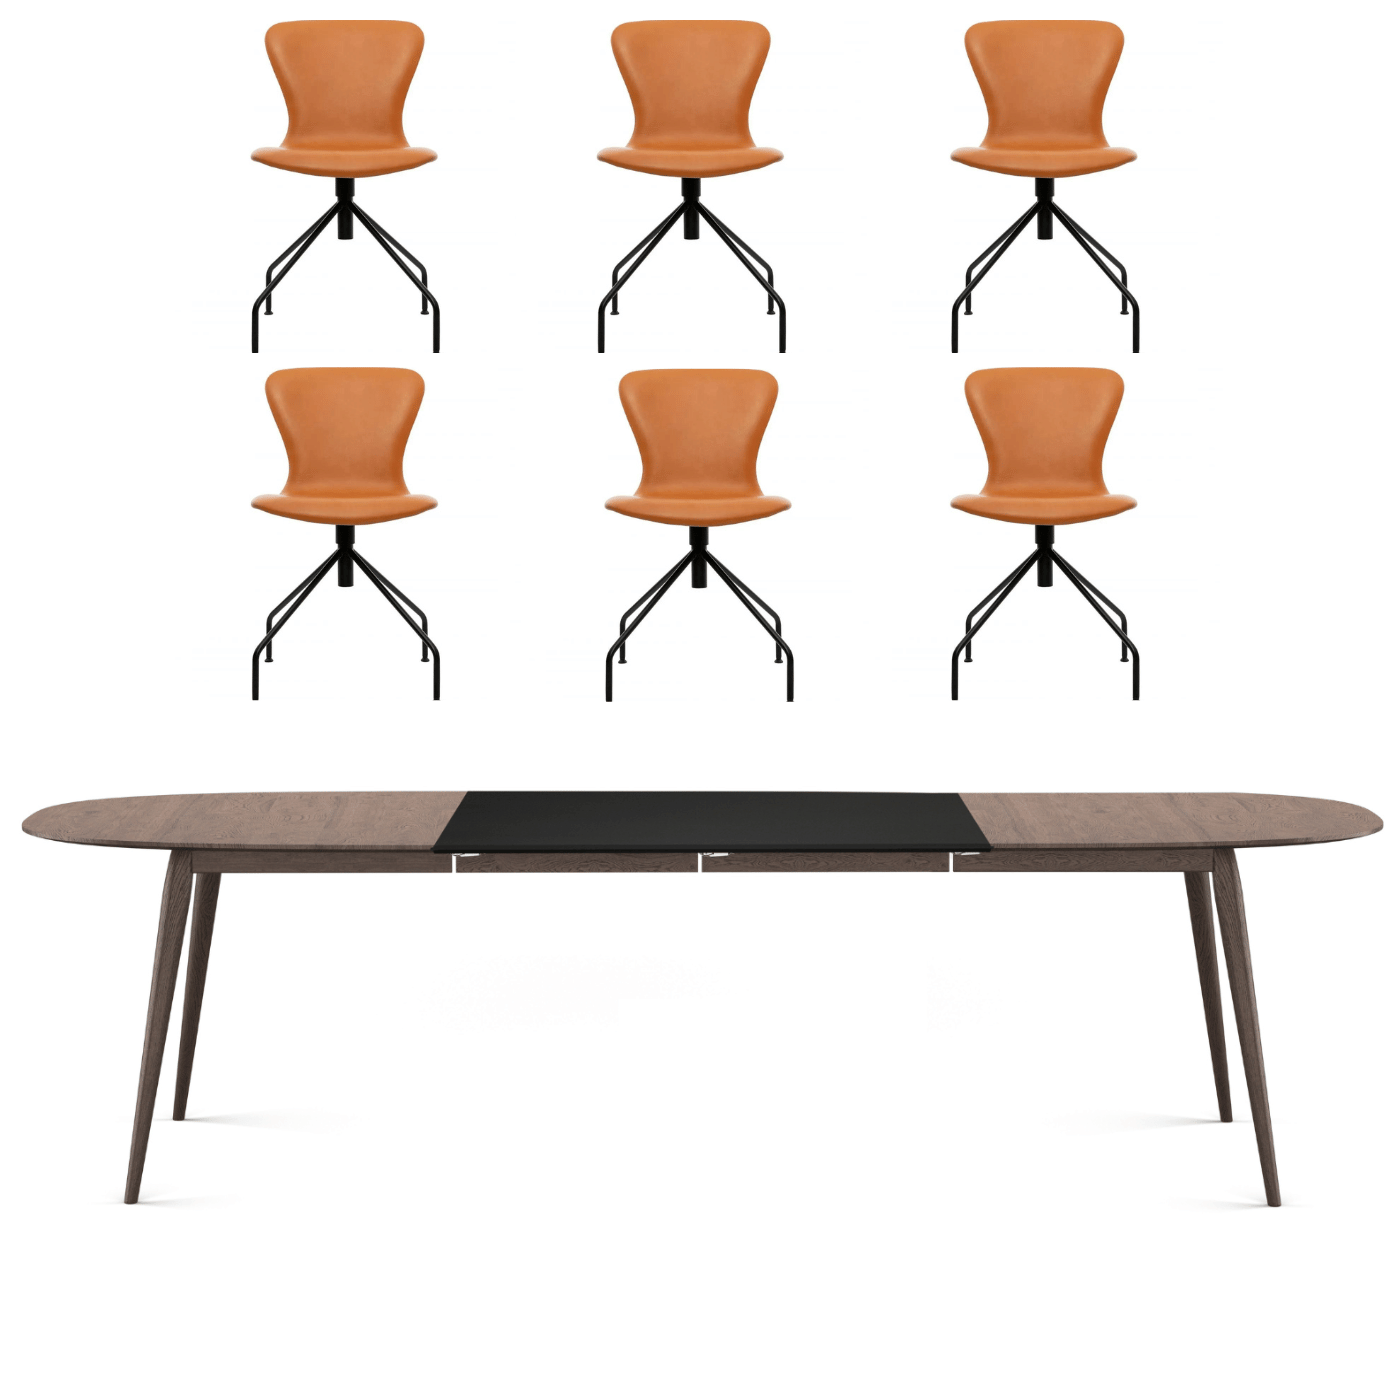 Bruunmunch Dining Bundle Playdinner Lame Table In Smoked Oak 2 X Extension Leaf In Mdf Black Clear Lacquer 6 X Playchair Swing In Cognac Leather D